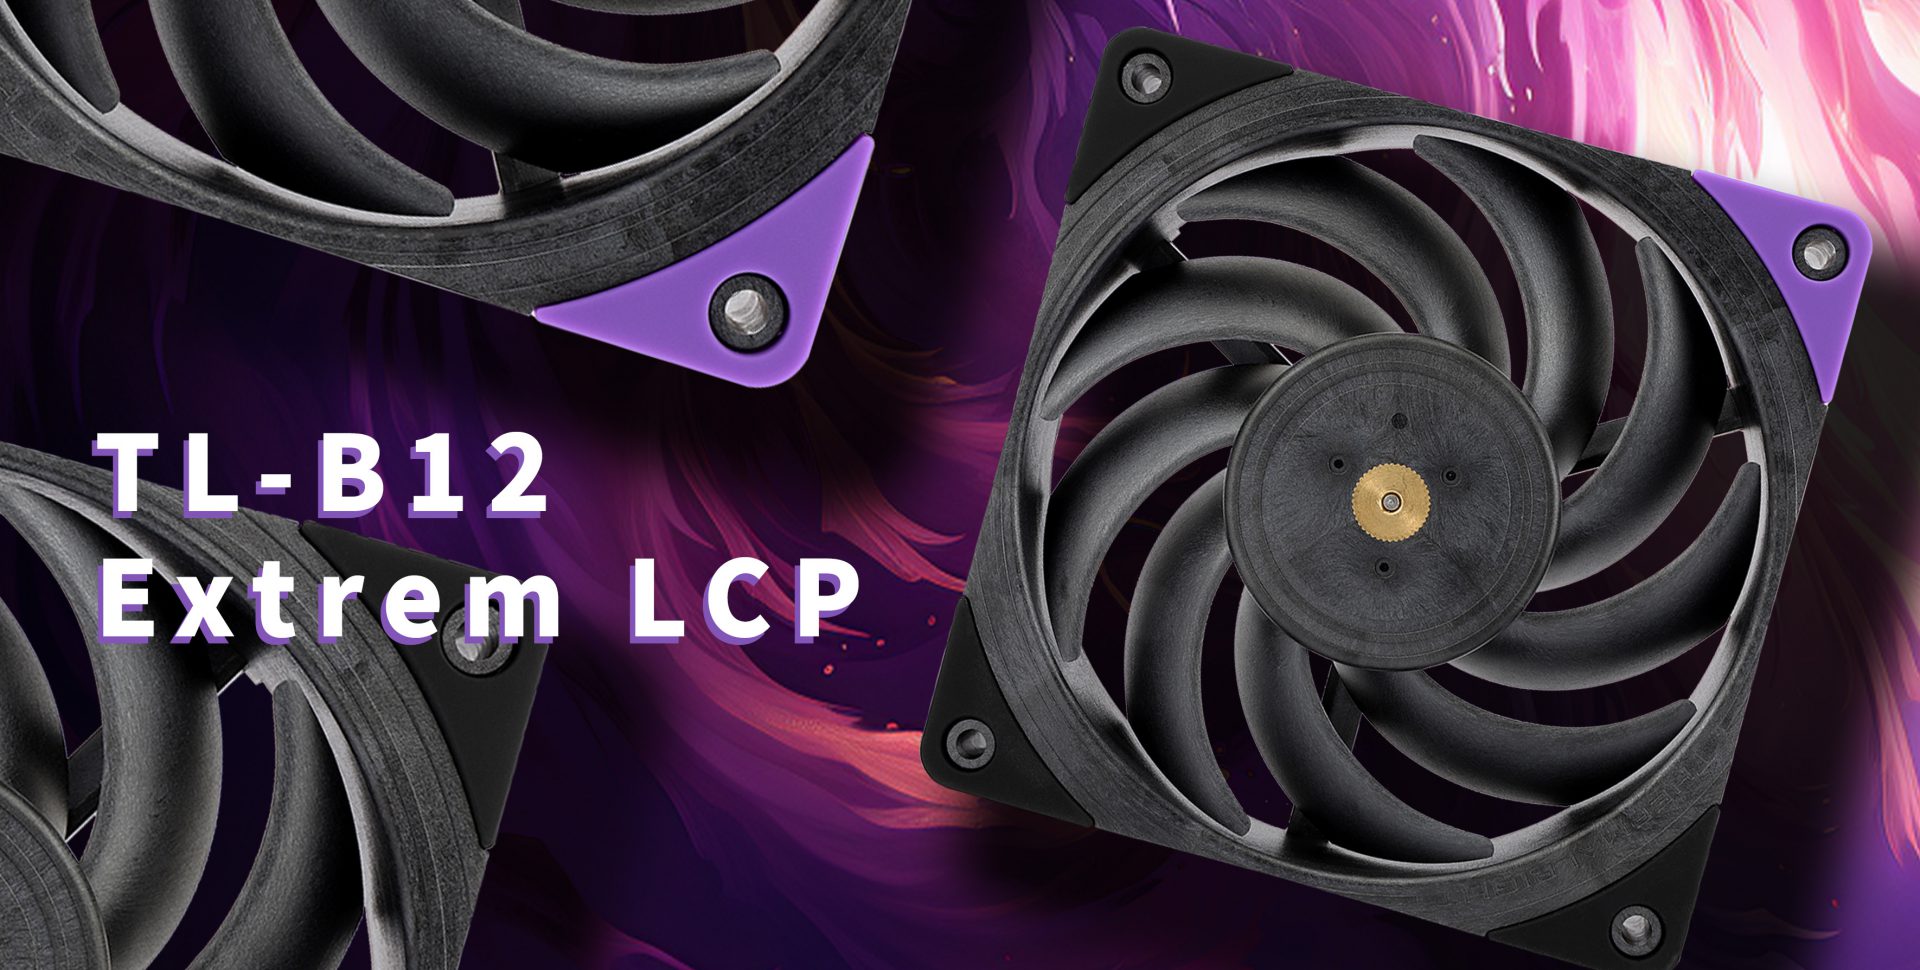 Thermalright Announces All-Copper, Low-Profile CPU Cooler